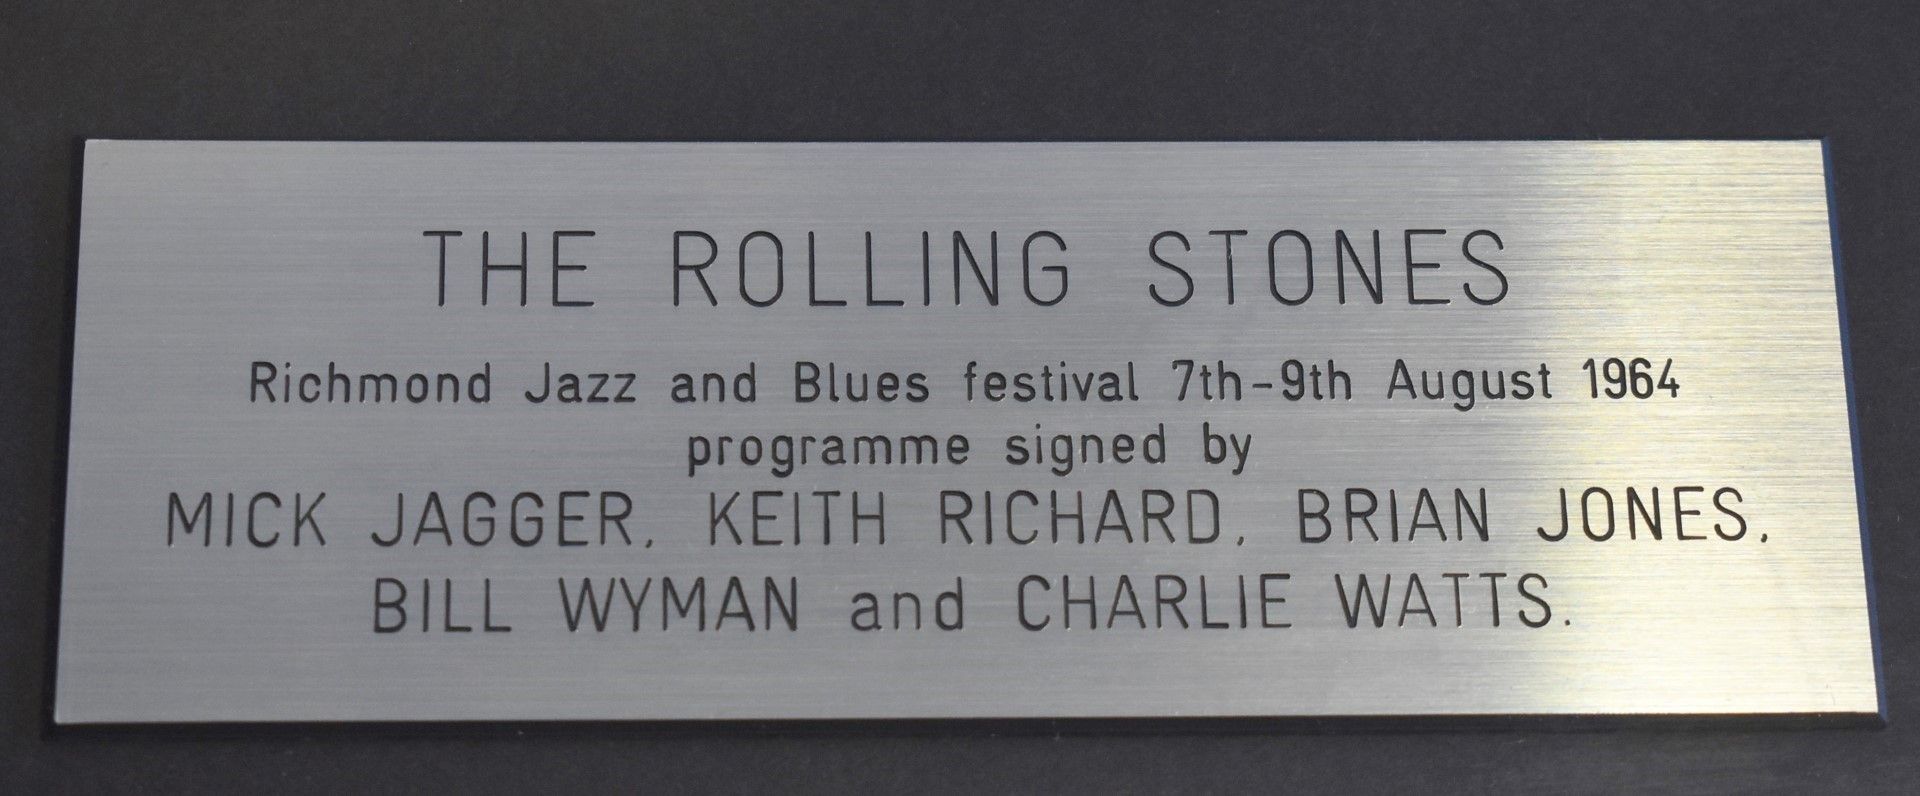 1 x Framed THE ROLLING STONES Autographs - 1964 Richmond Jazz and Blues Festival Programme Signed - Image 12 of 13